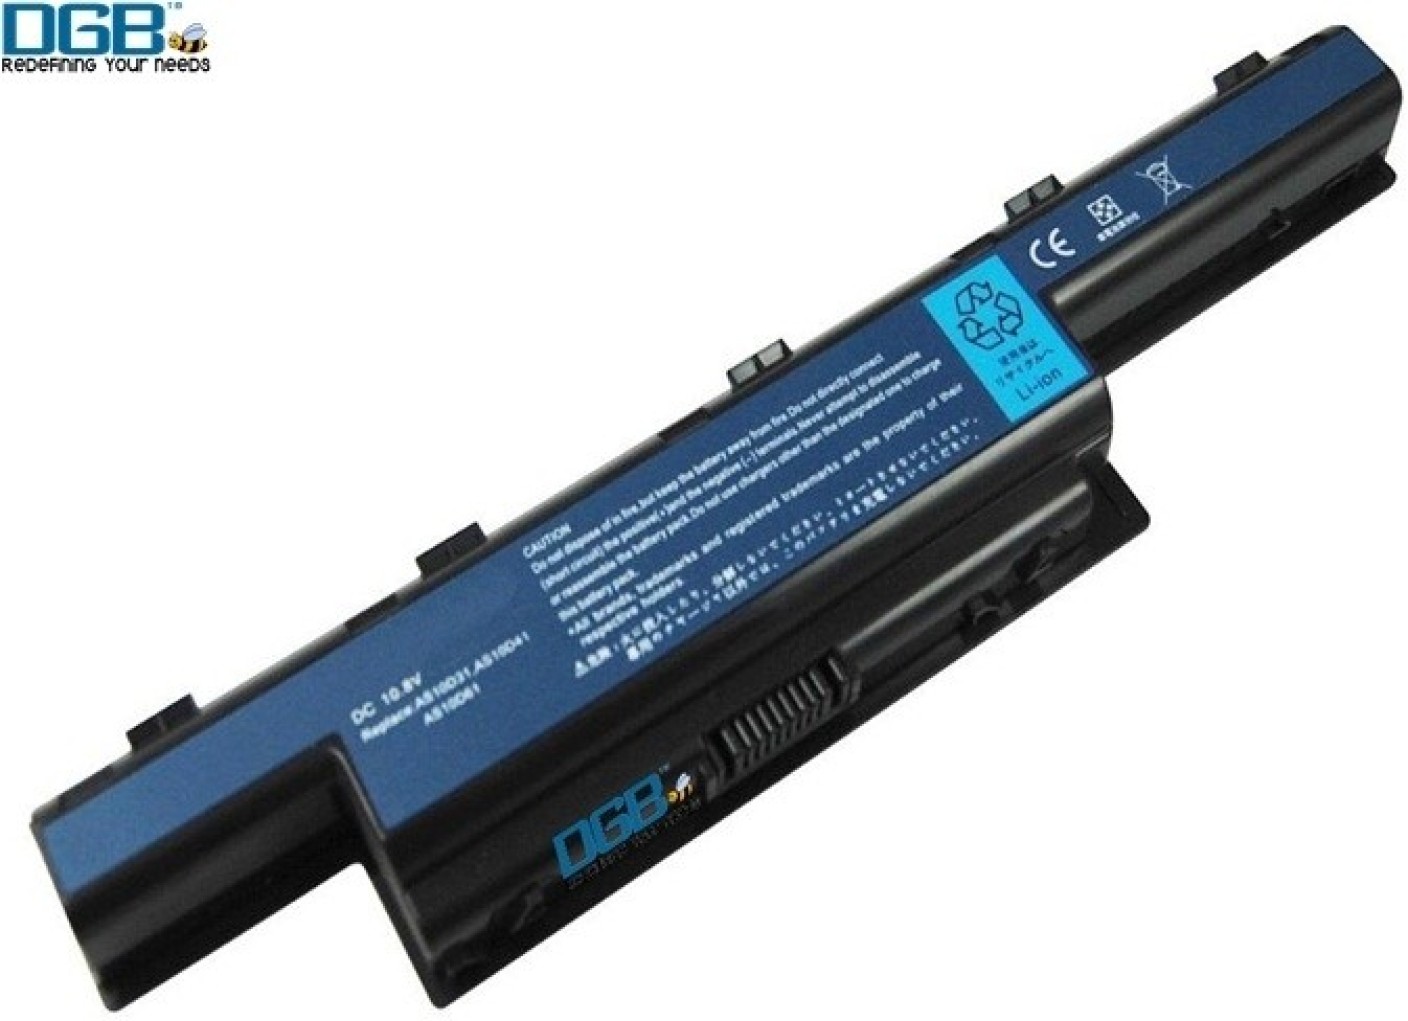 Battery for acer laptop computer